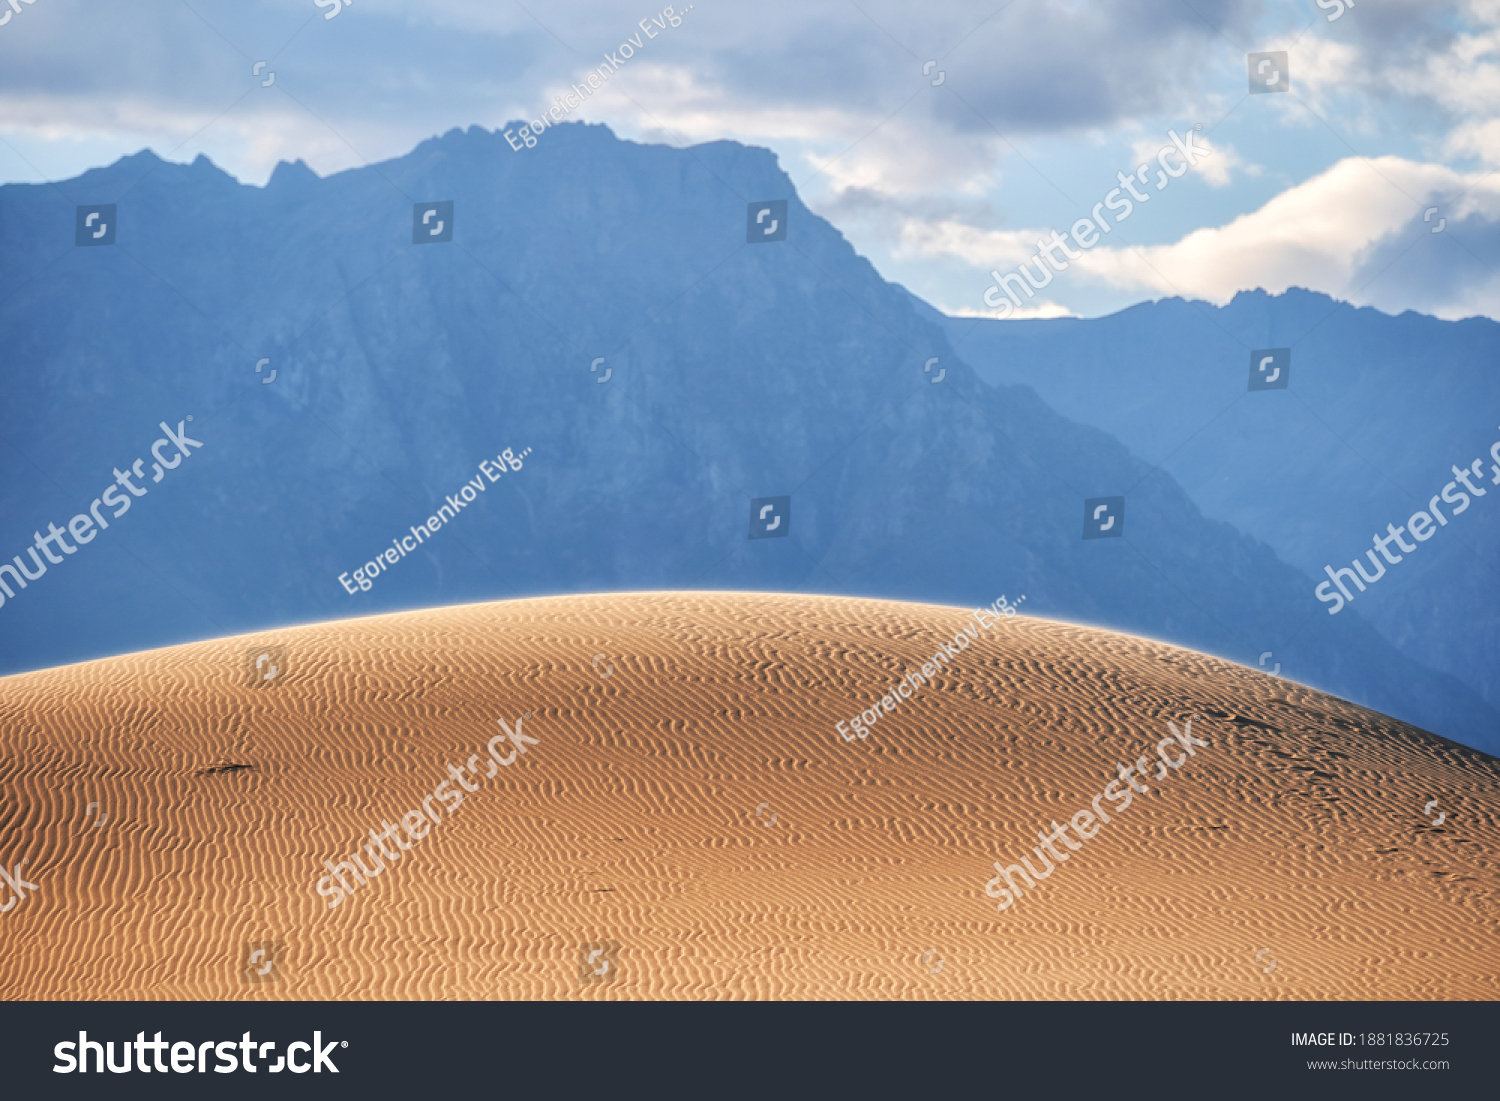 The hill of the Chara desert against the background of the Transbaikal mountains #1881836725